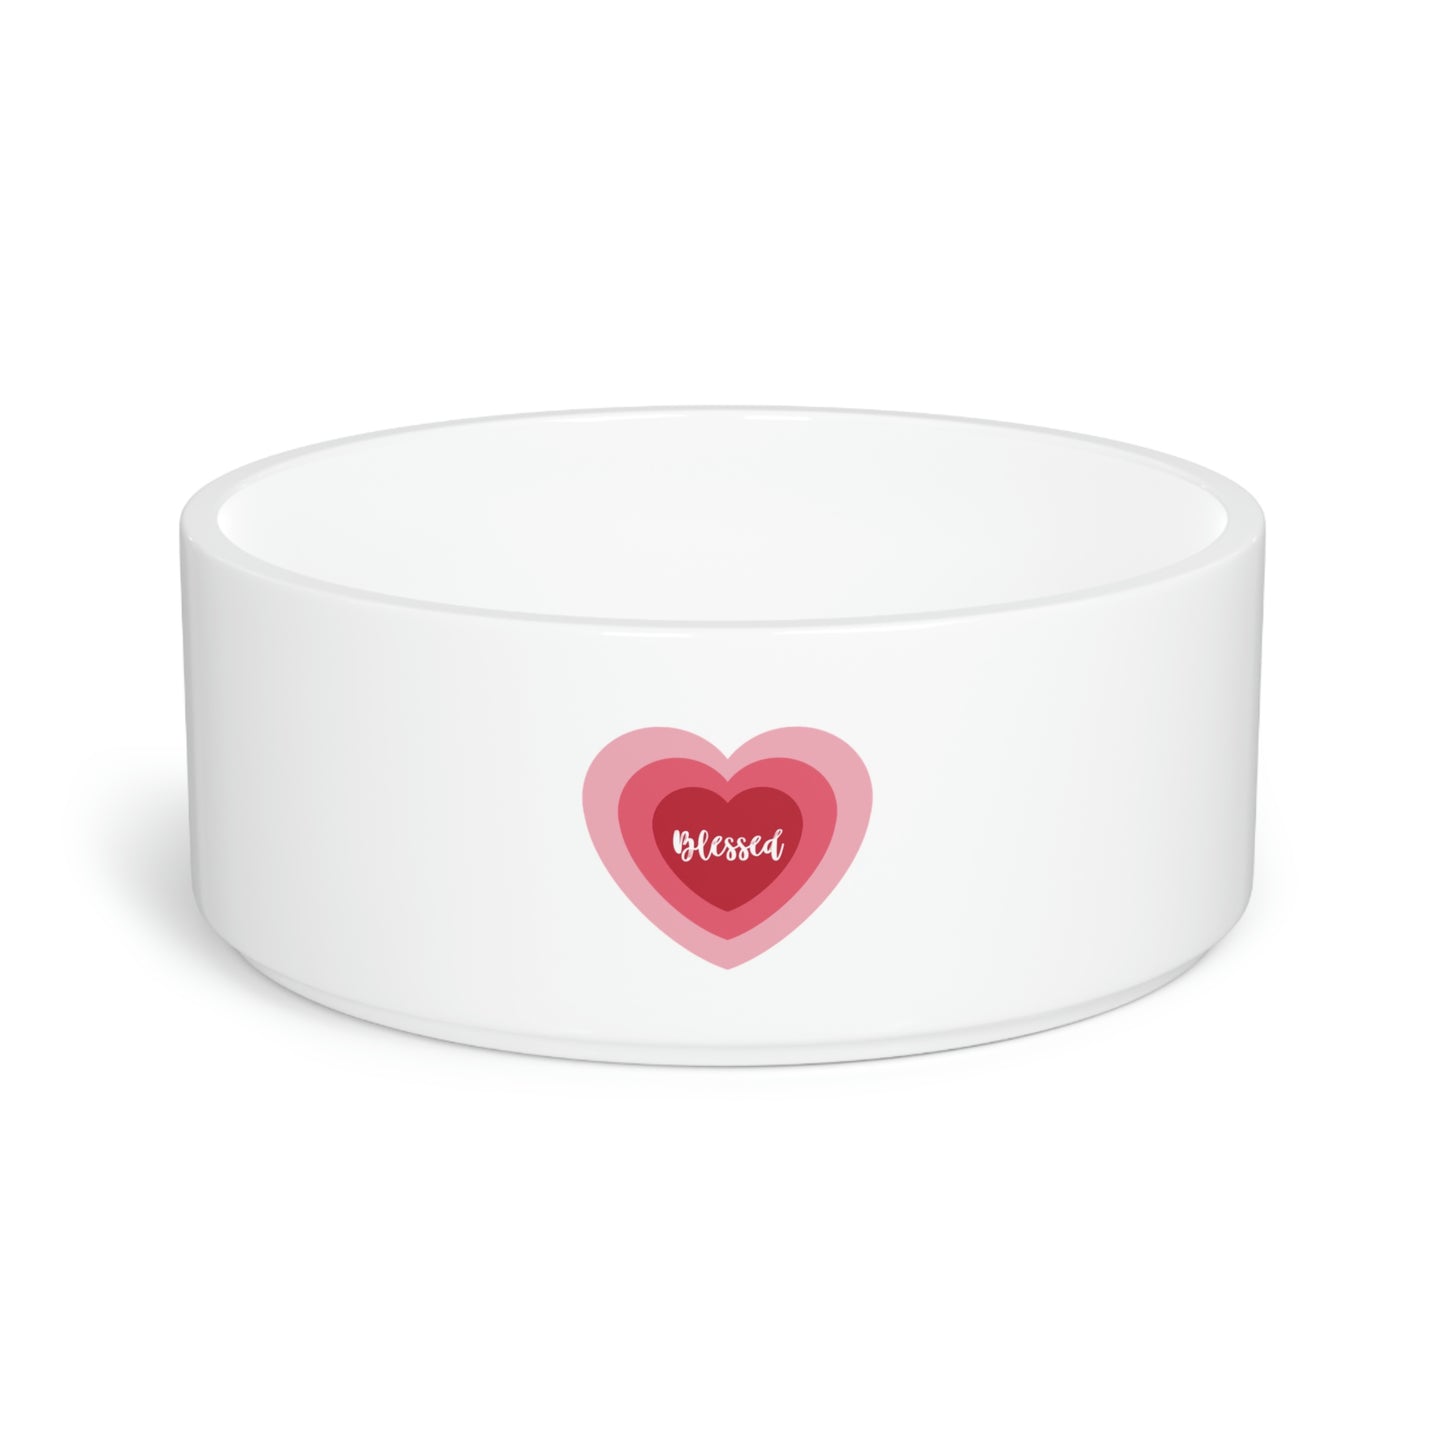 Blessed Heart Pet Bowl